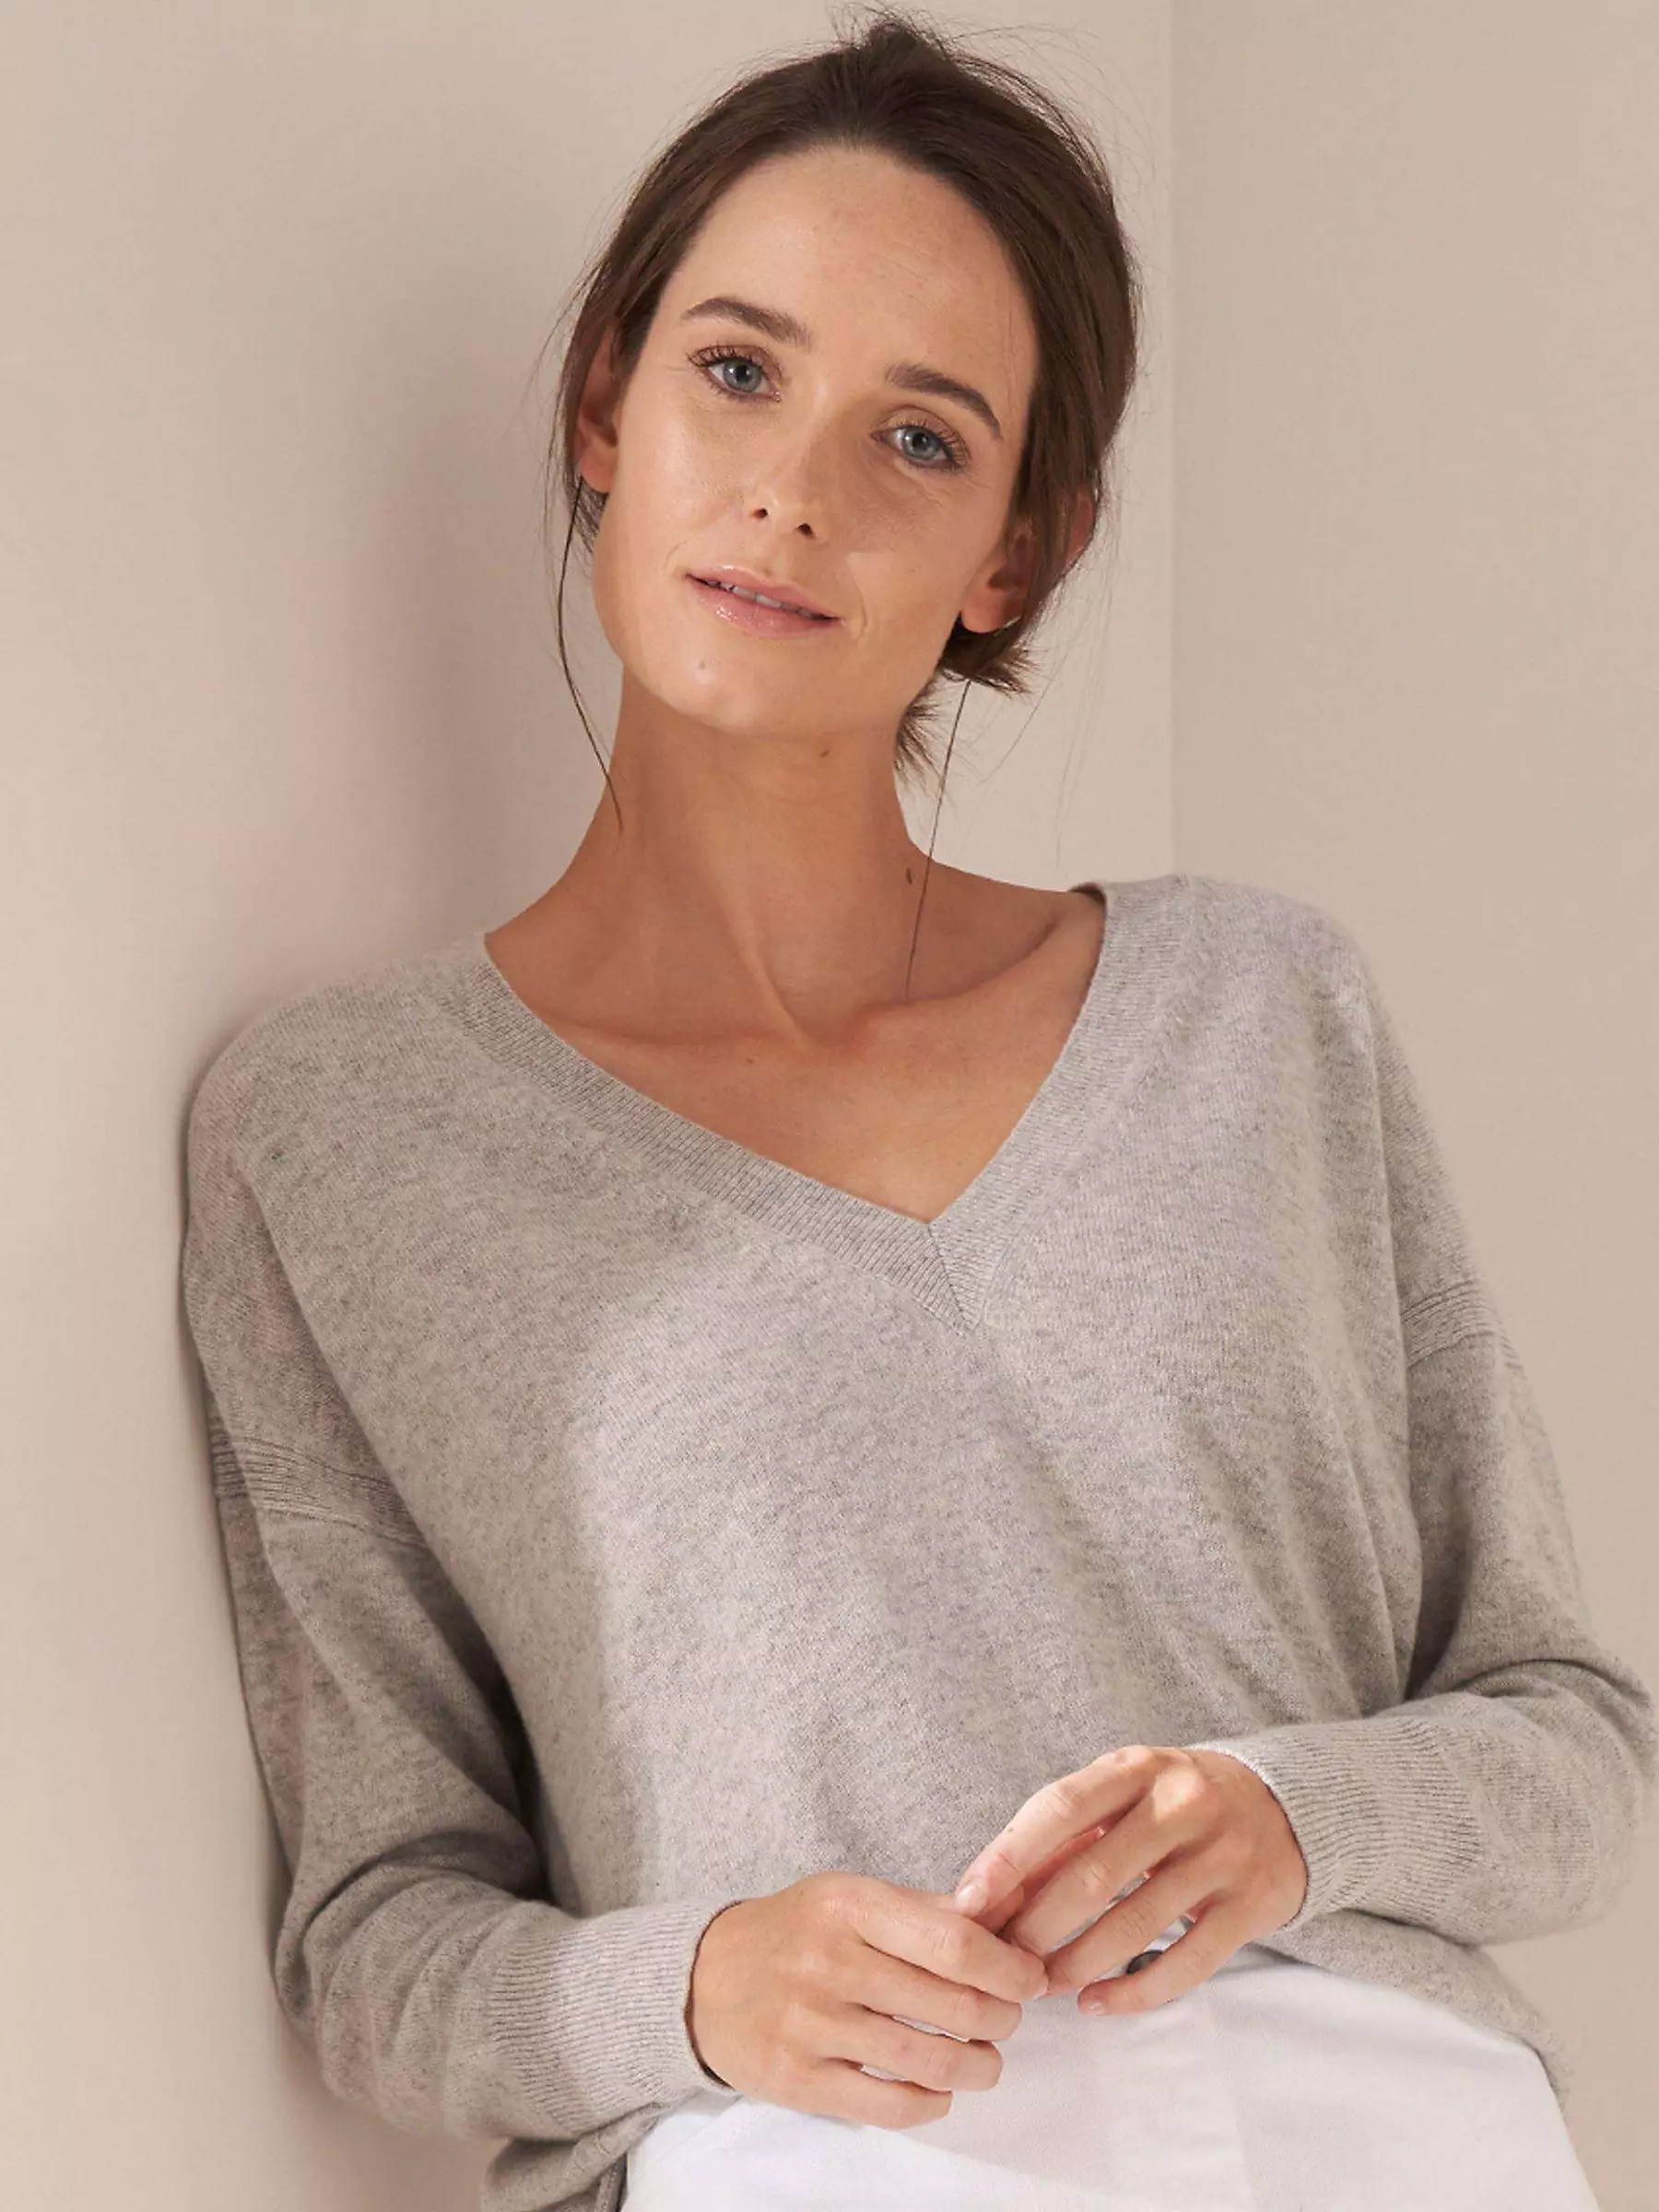 What are the Benefits of Owning a Cashmere Jumper for Women?